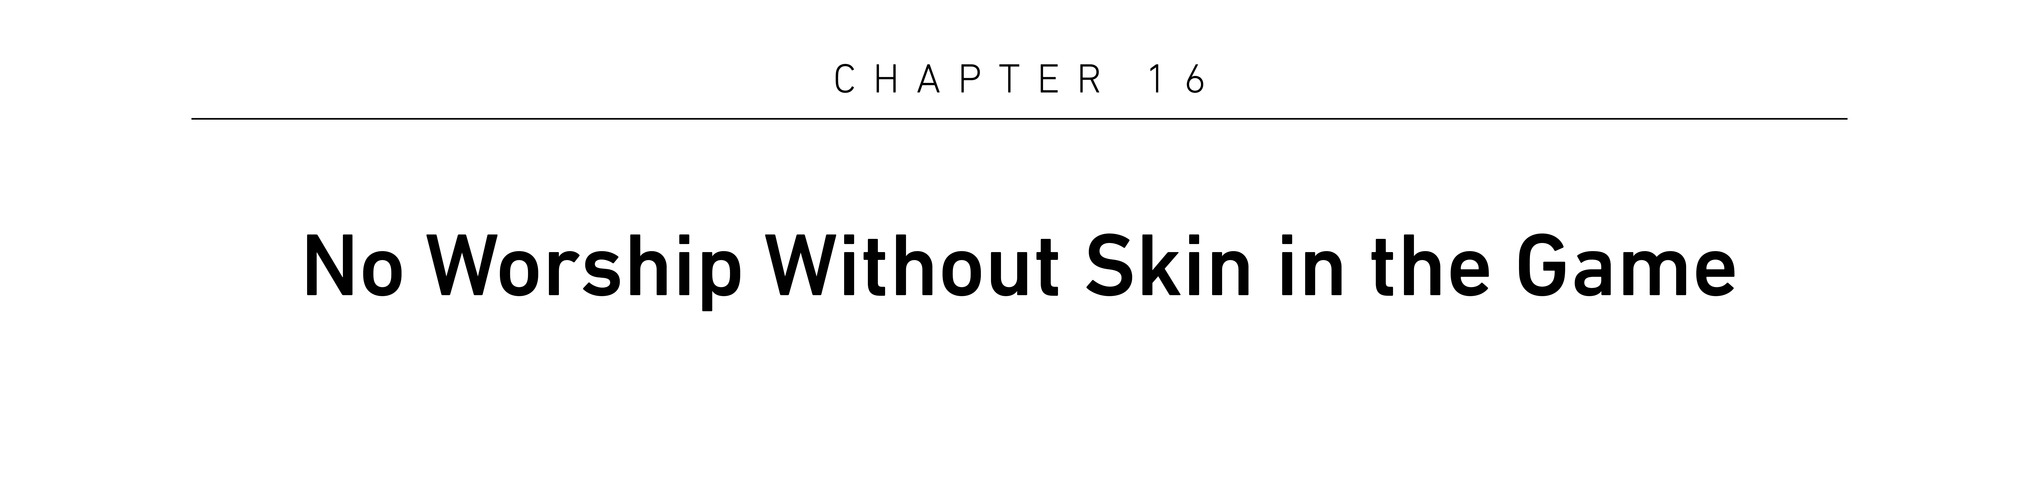 Chapter 16 No Worship Without Skin in the Game